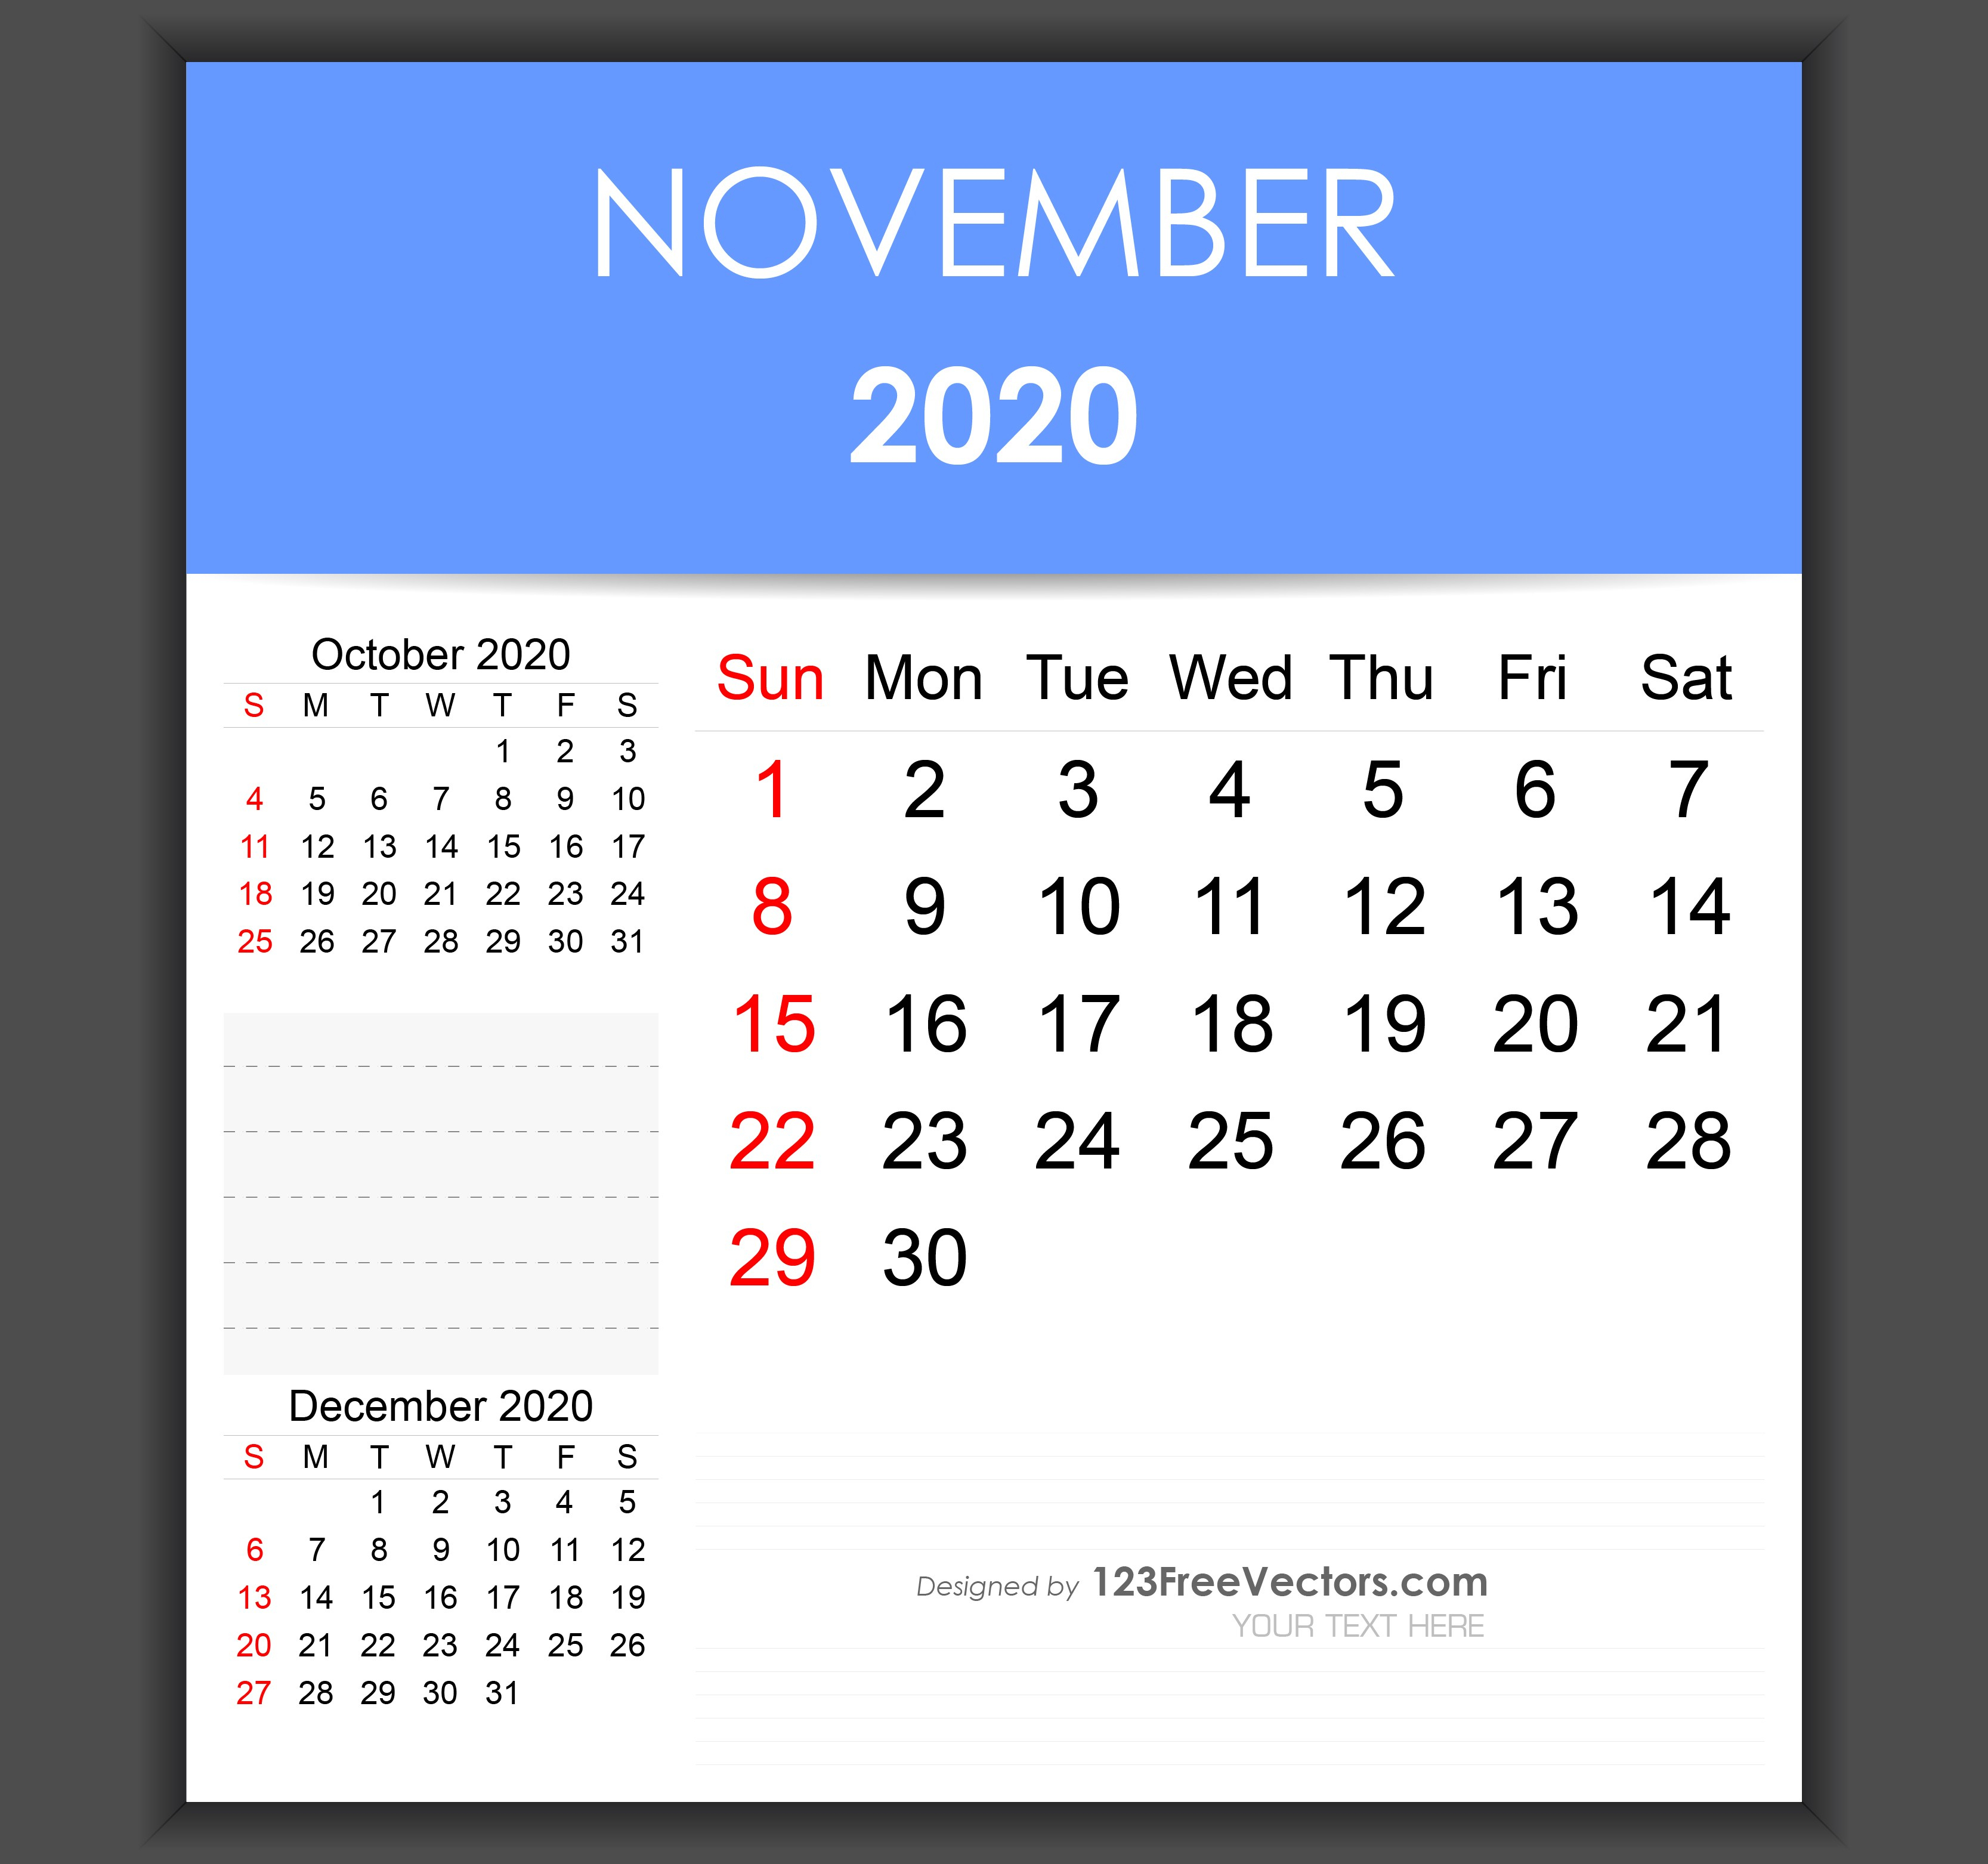 Novemberclipart | Free Vector Graphics | 123Freevectors intended for November 2020 Clipart